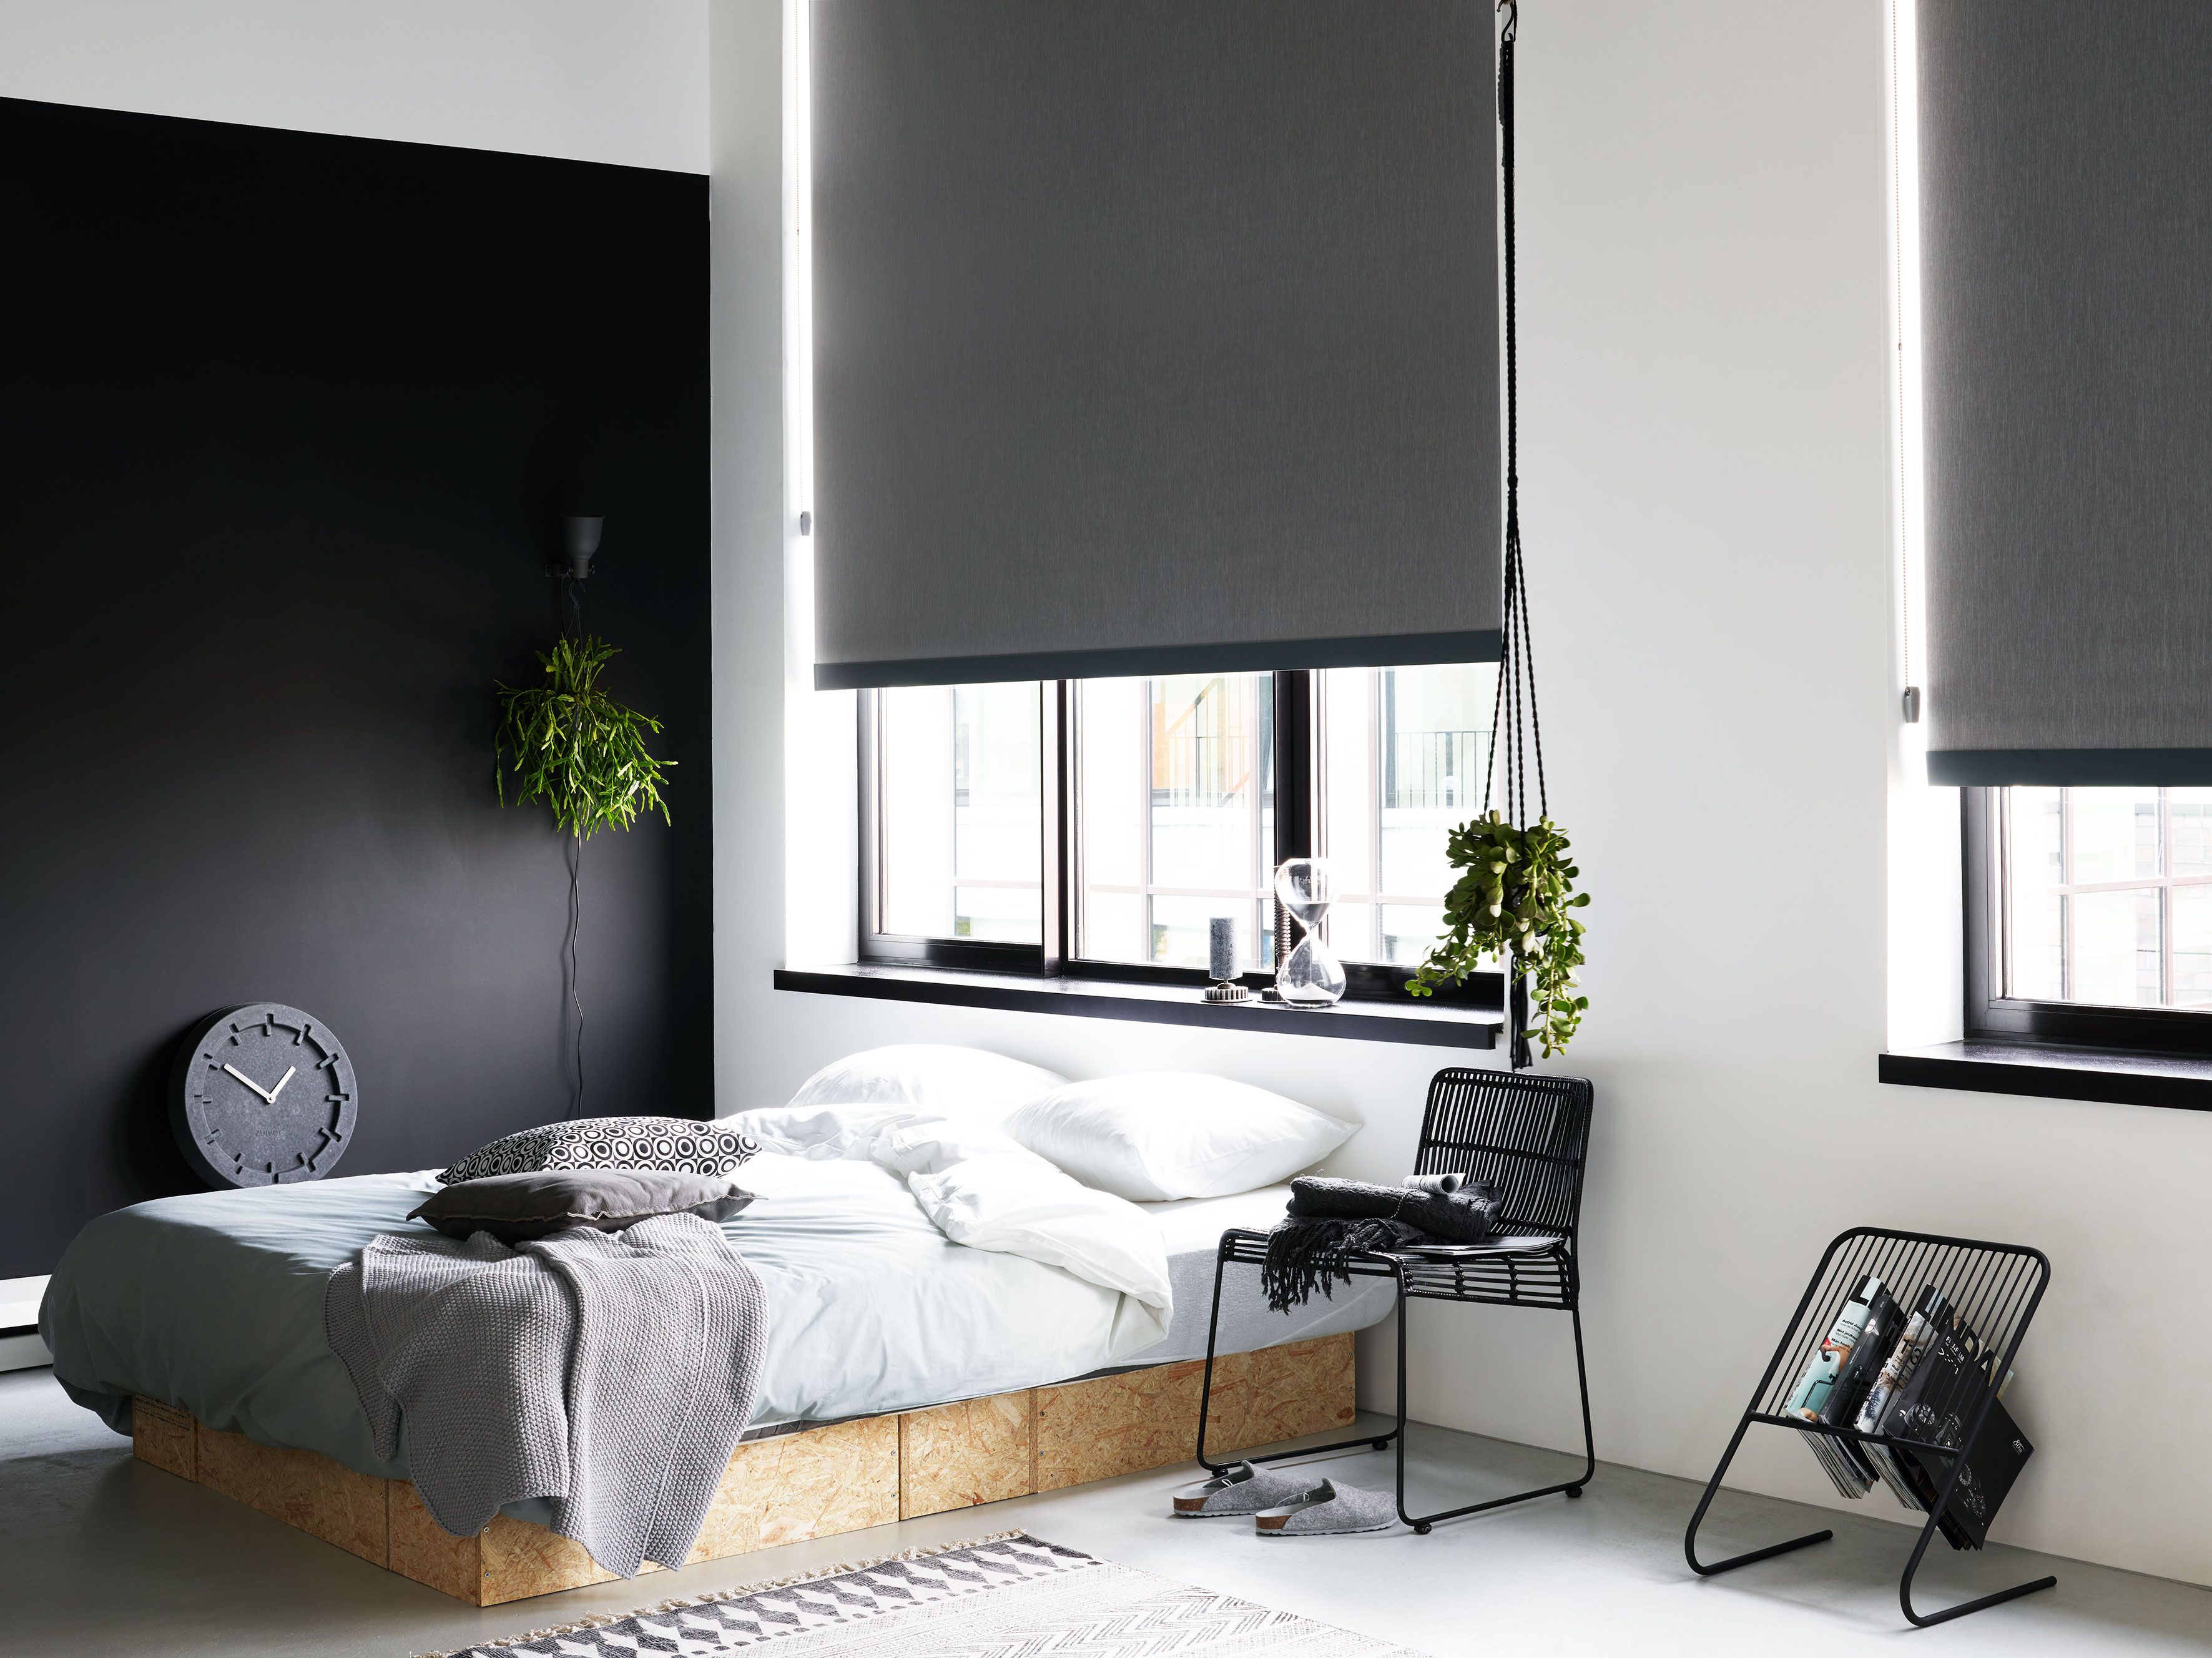 bw Scandinavian bedroom ideas that will inspire you for a remodel